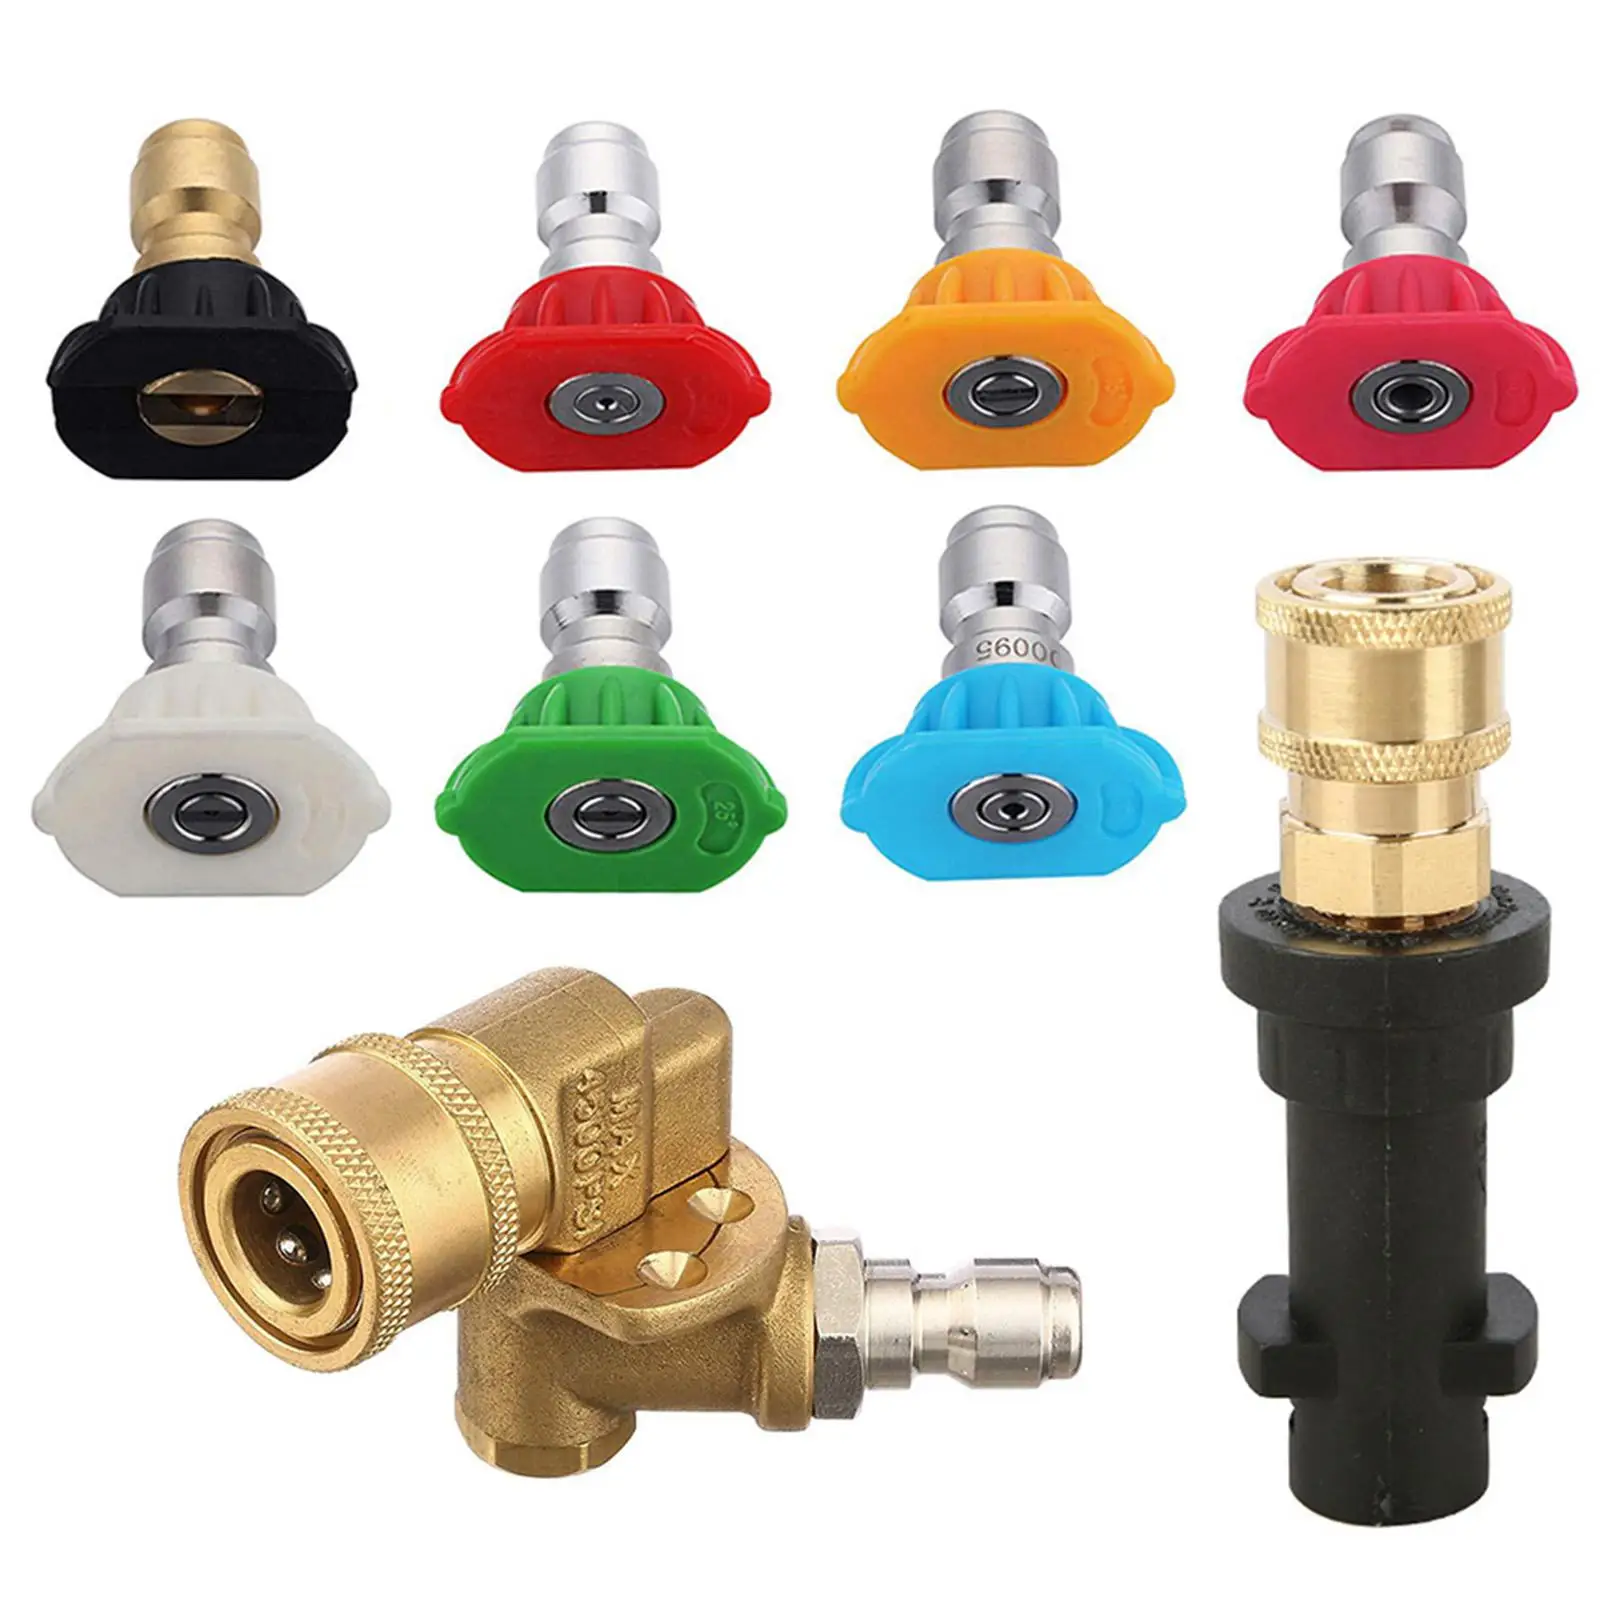 Adjustable Pressure Washer Adapter Set Nozzles 1/4inch Quick Connector for K2 K6 K4